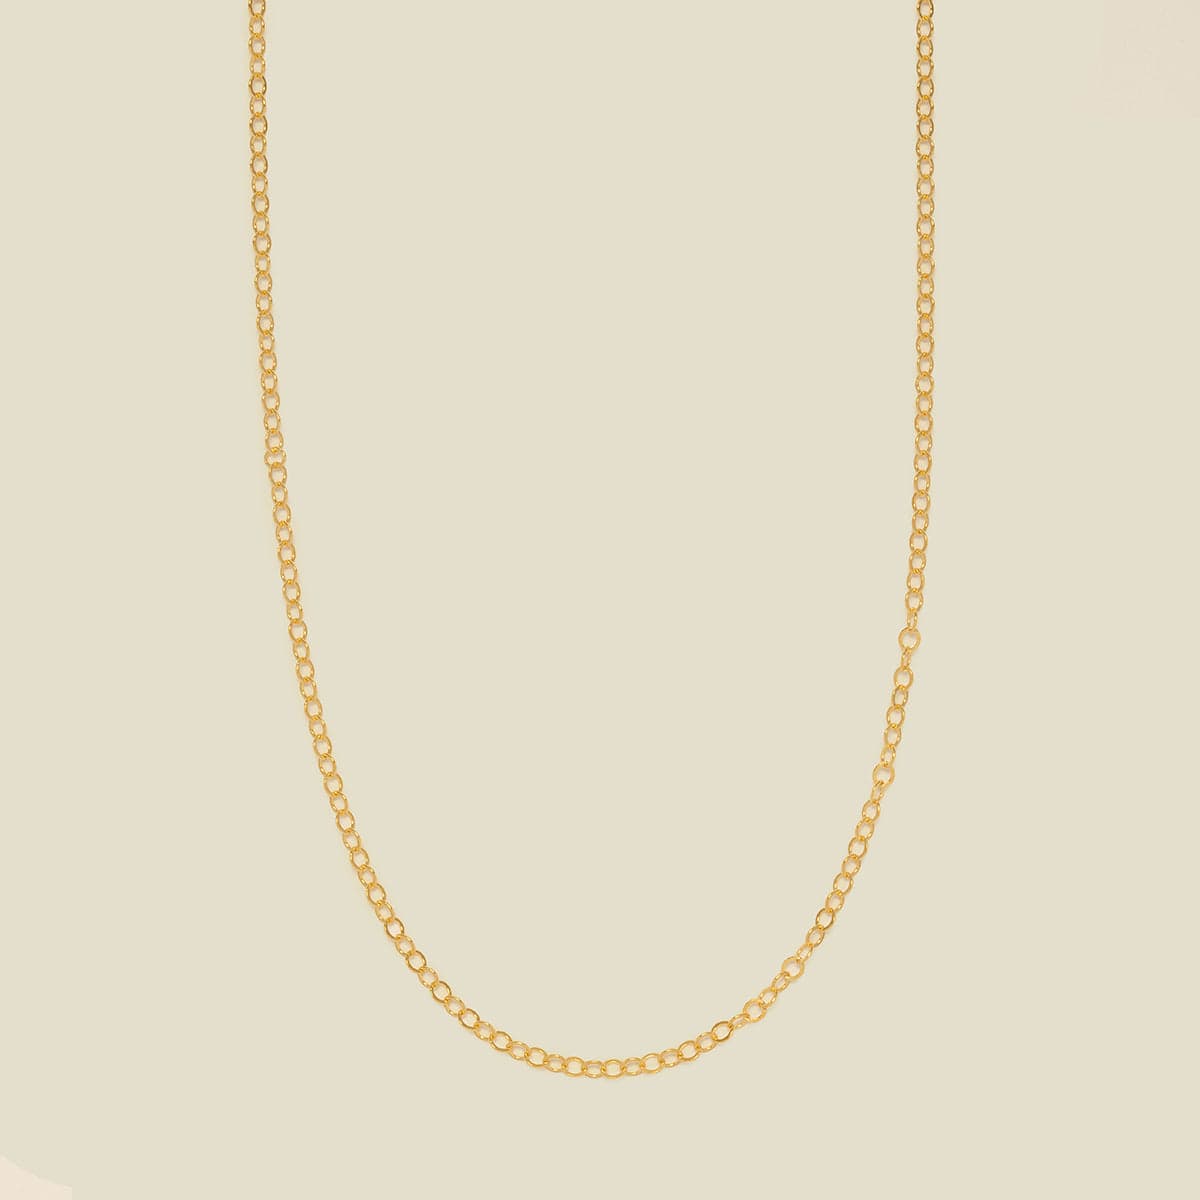 Adjustable Flat Cable Chain Gold Filled / 1.8mm / 13"-15" Necklace